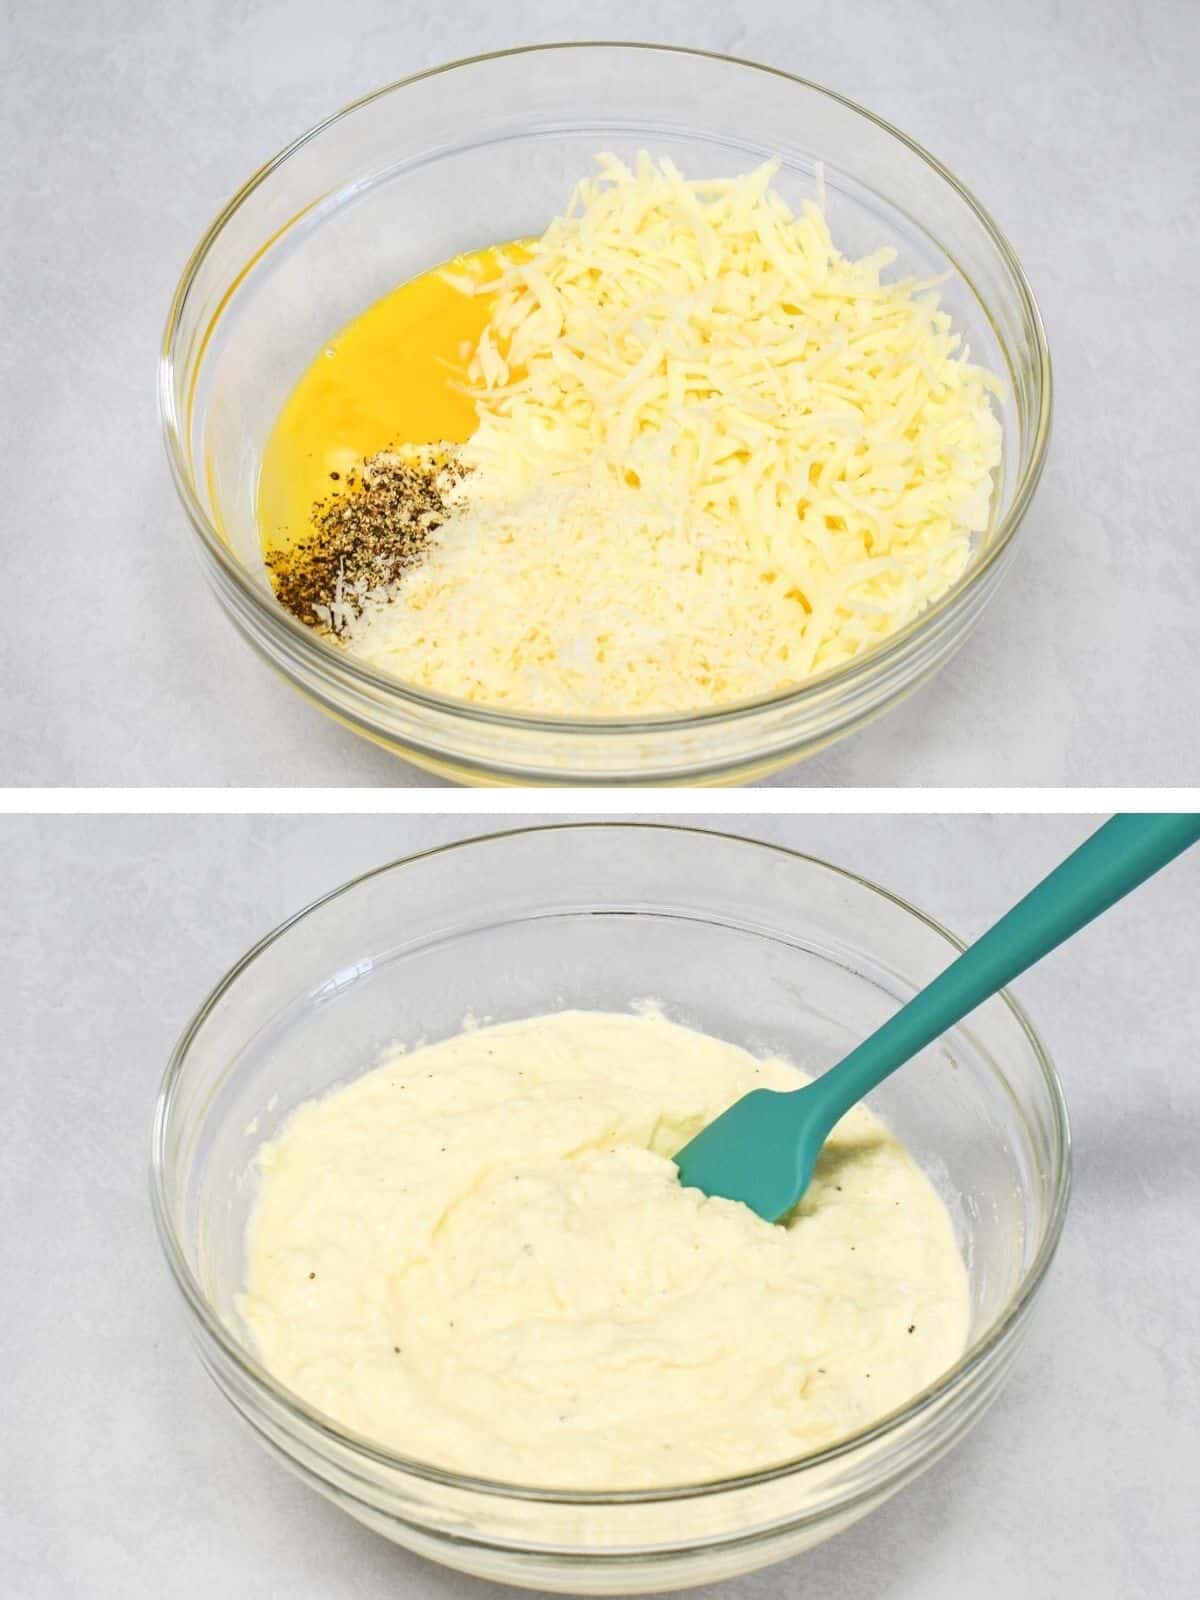 Two images showing the steps to making the cheese mixture.